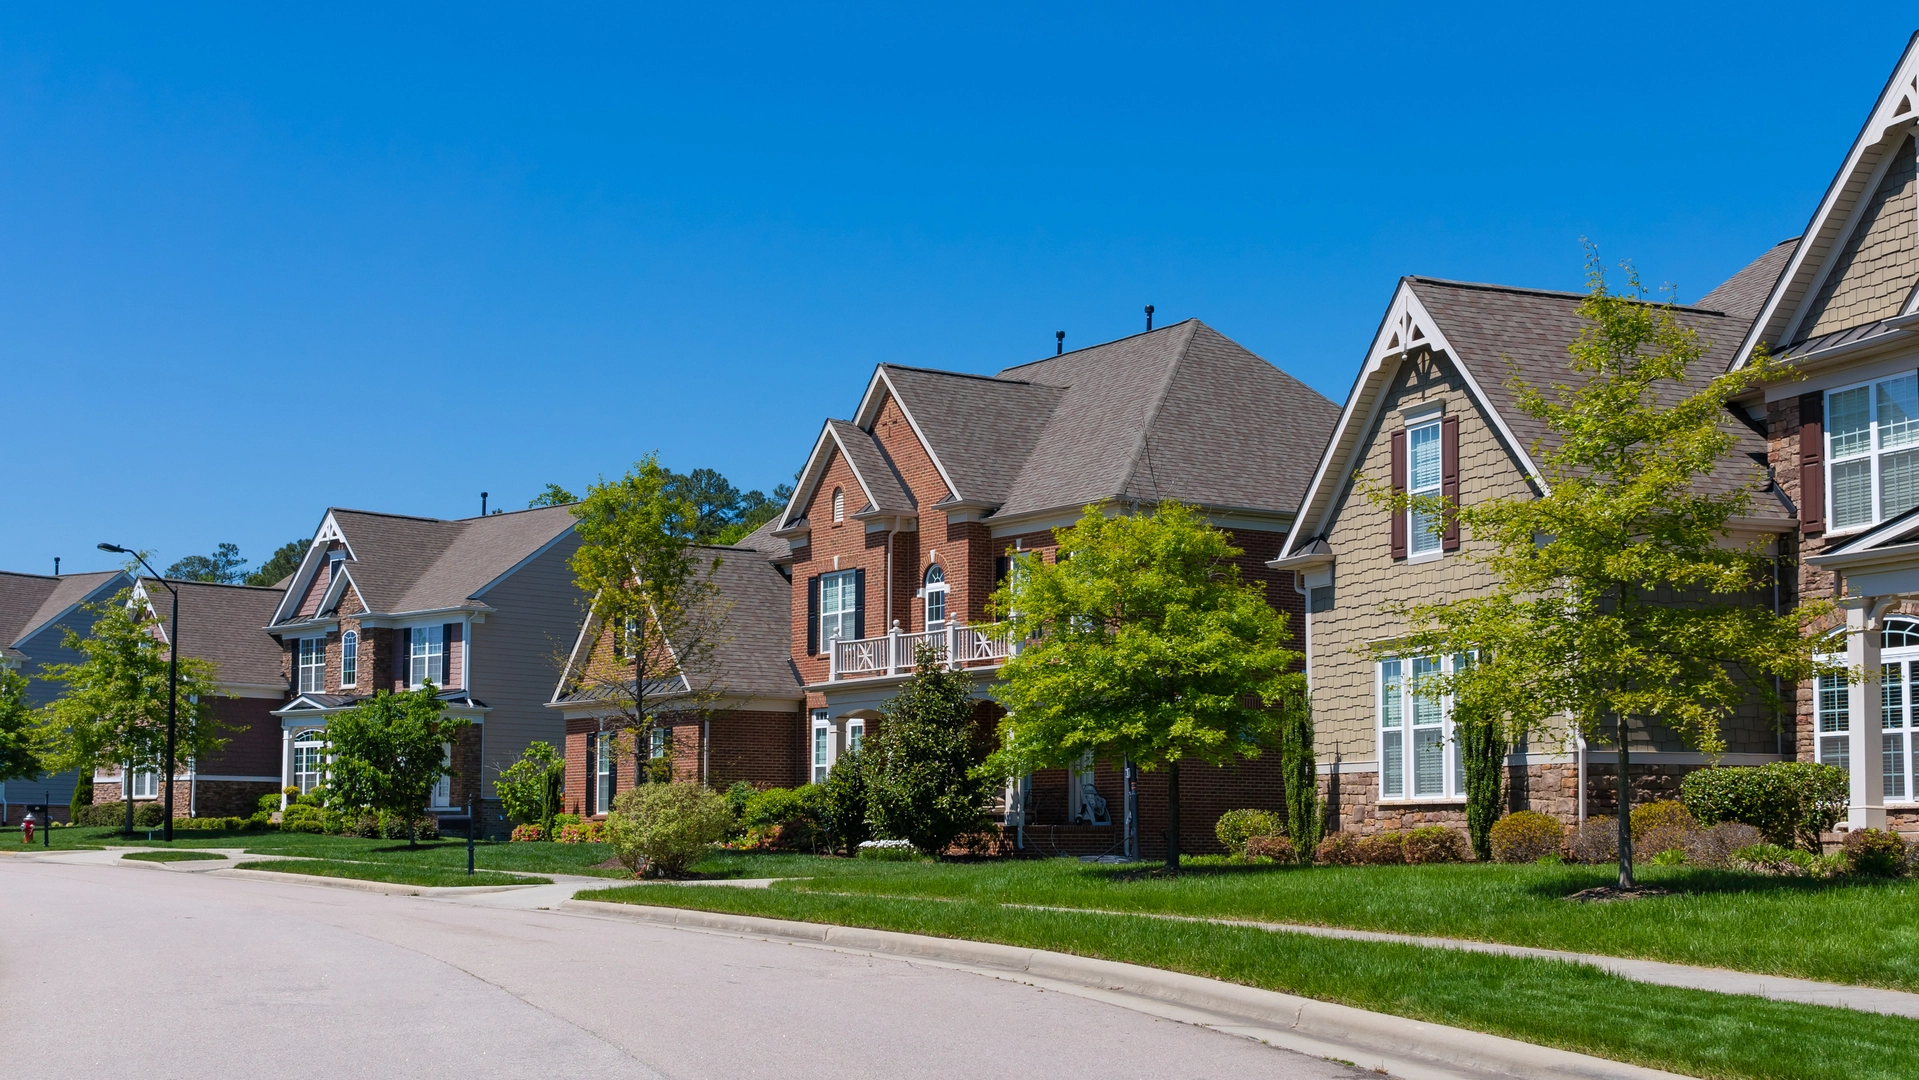 A safe neighborhood in Blue Ash, OH with healthy lawn and landscaping. 